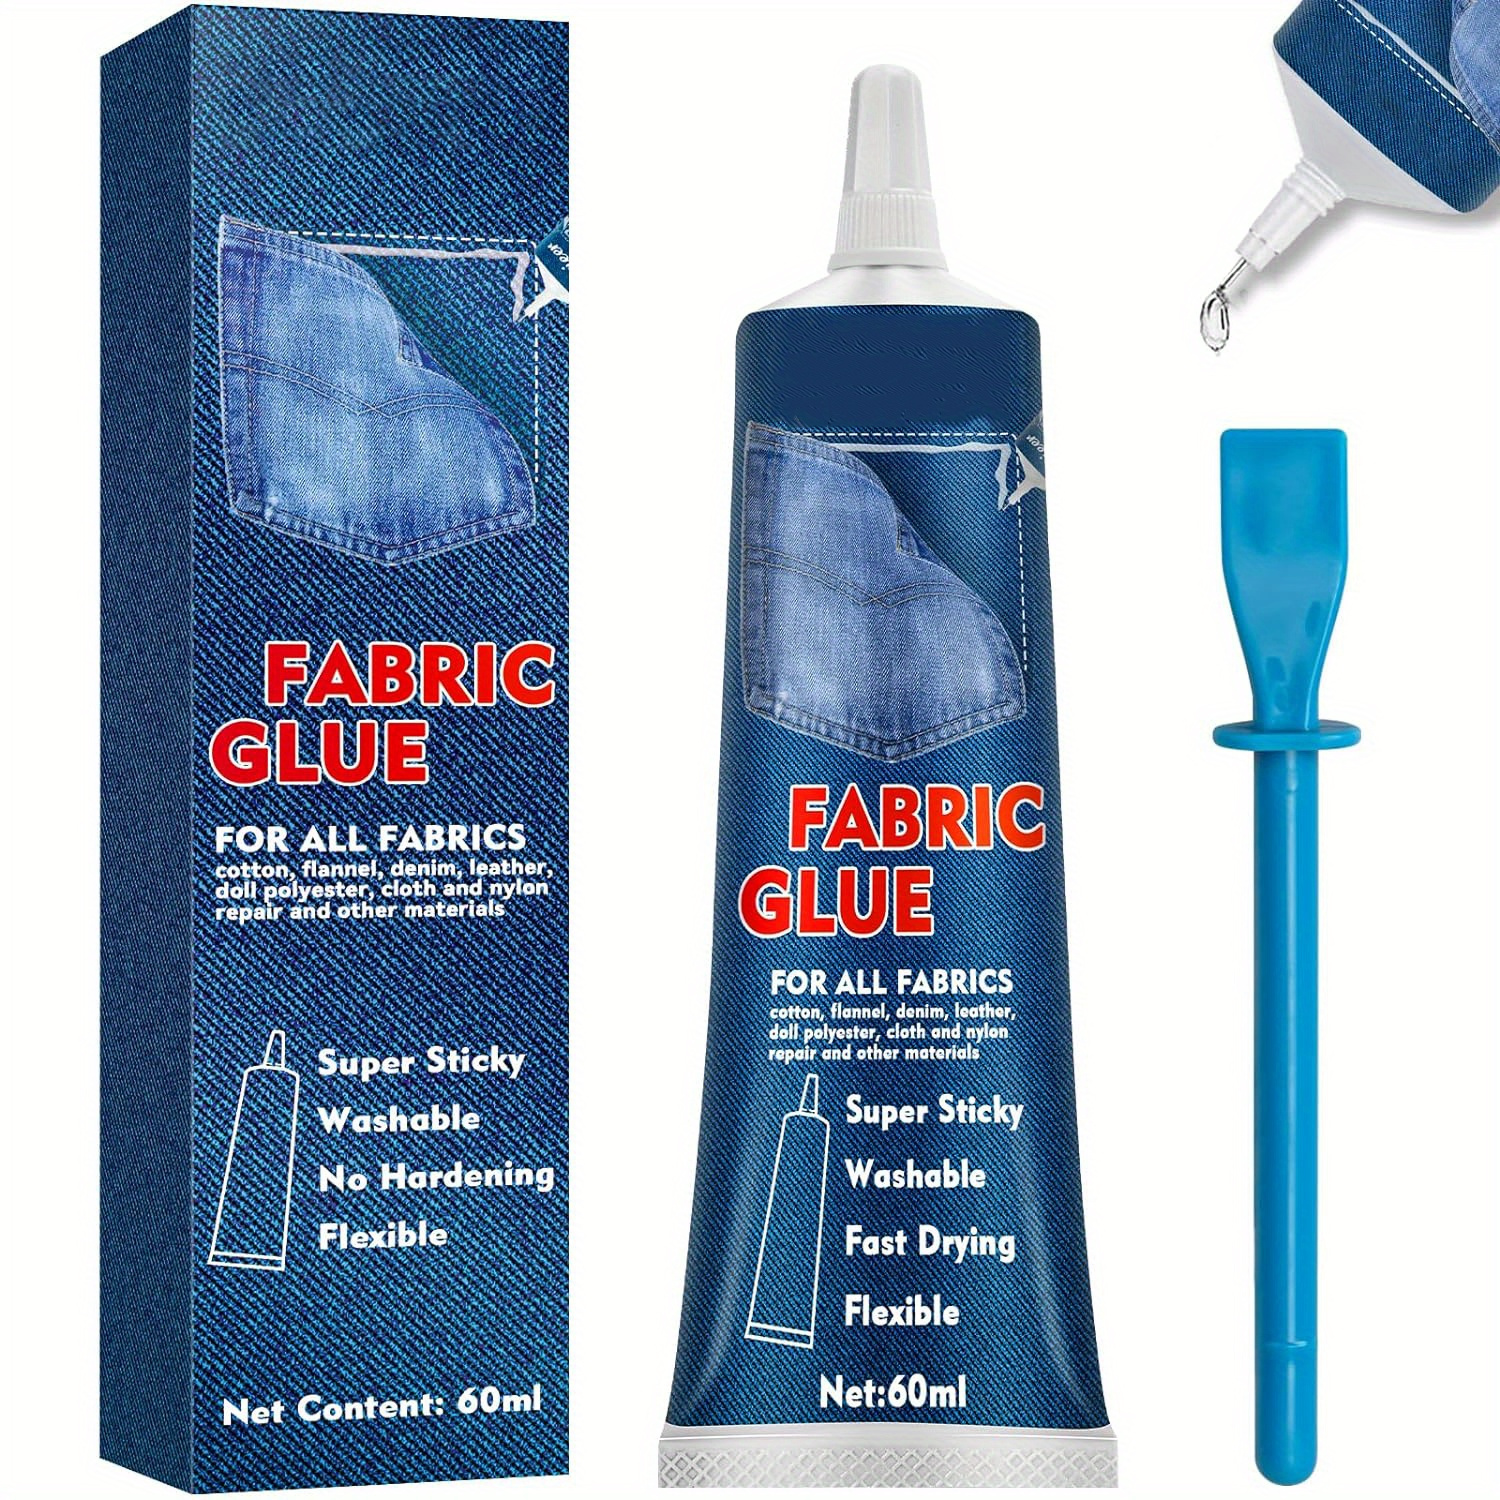 50ML Fabric Glue Multi-purpose Fabric Sewing Liquid Fast Tack Dry for Jeans  Clothing Leather Full